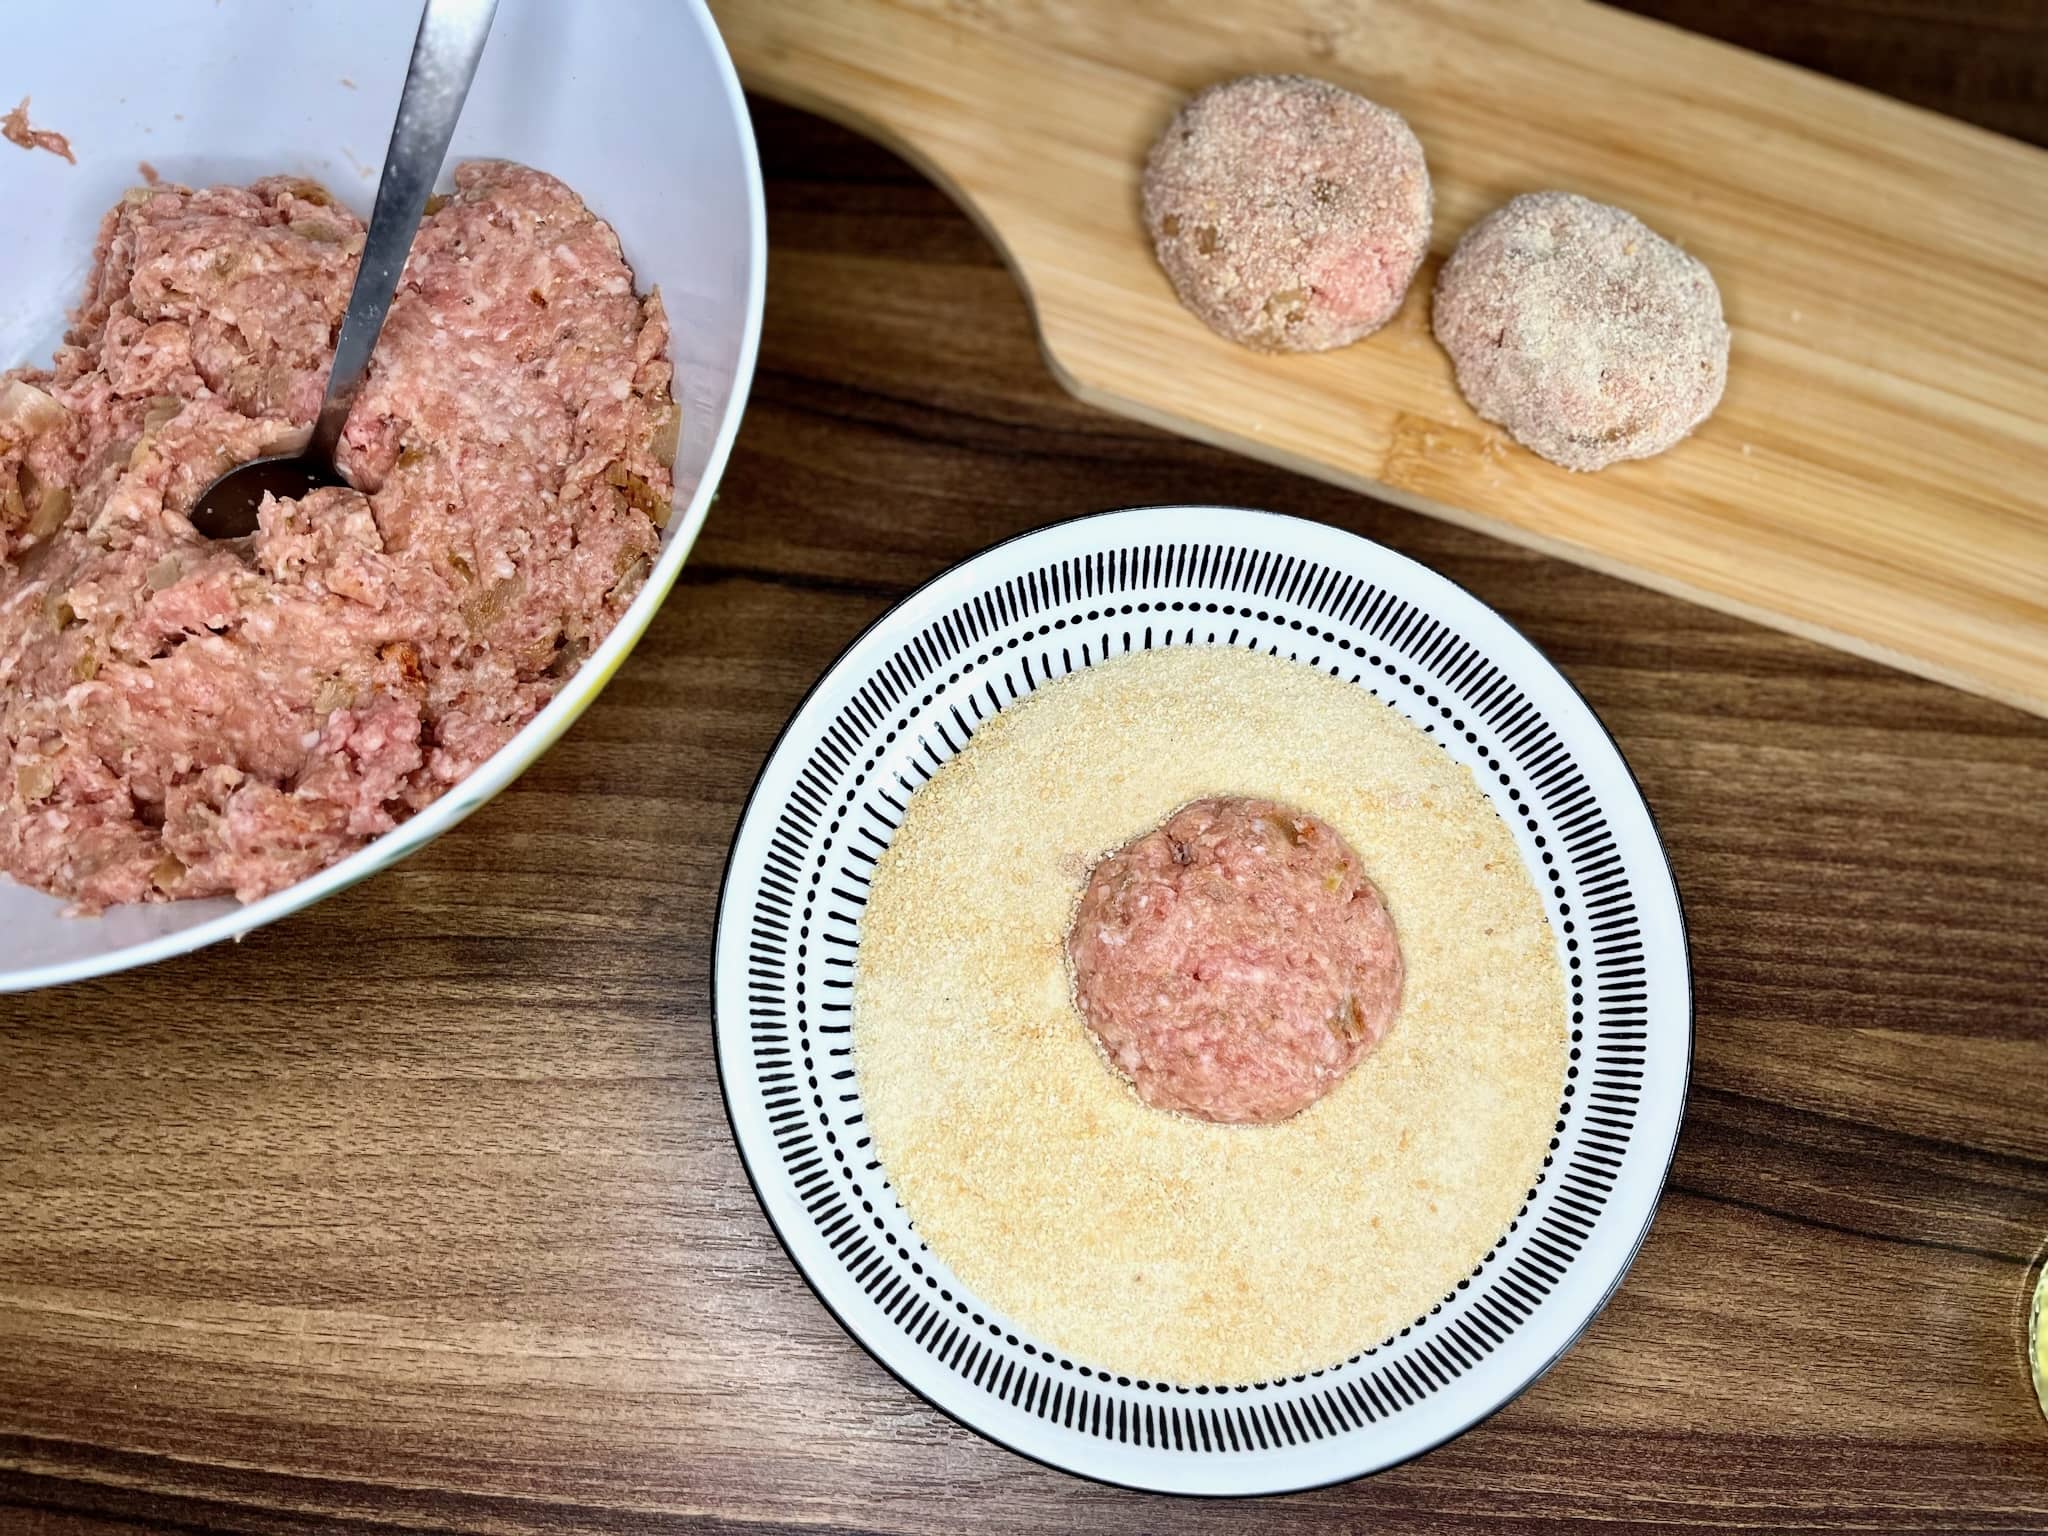 Portion of meat mixture in a bowl on top of breadcrumbs